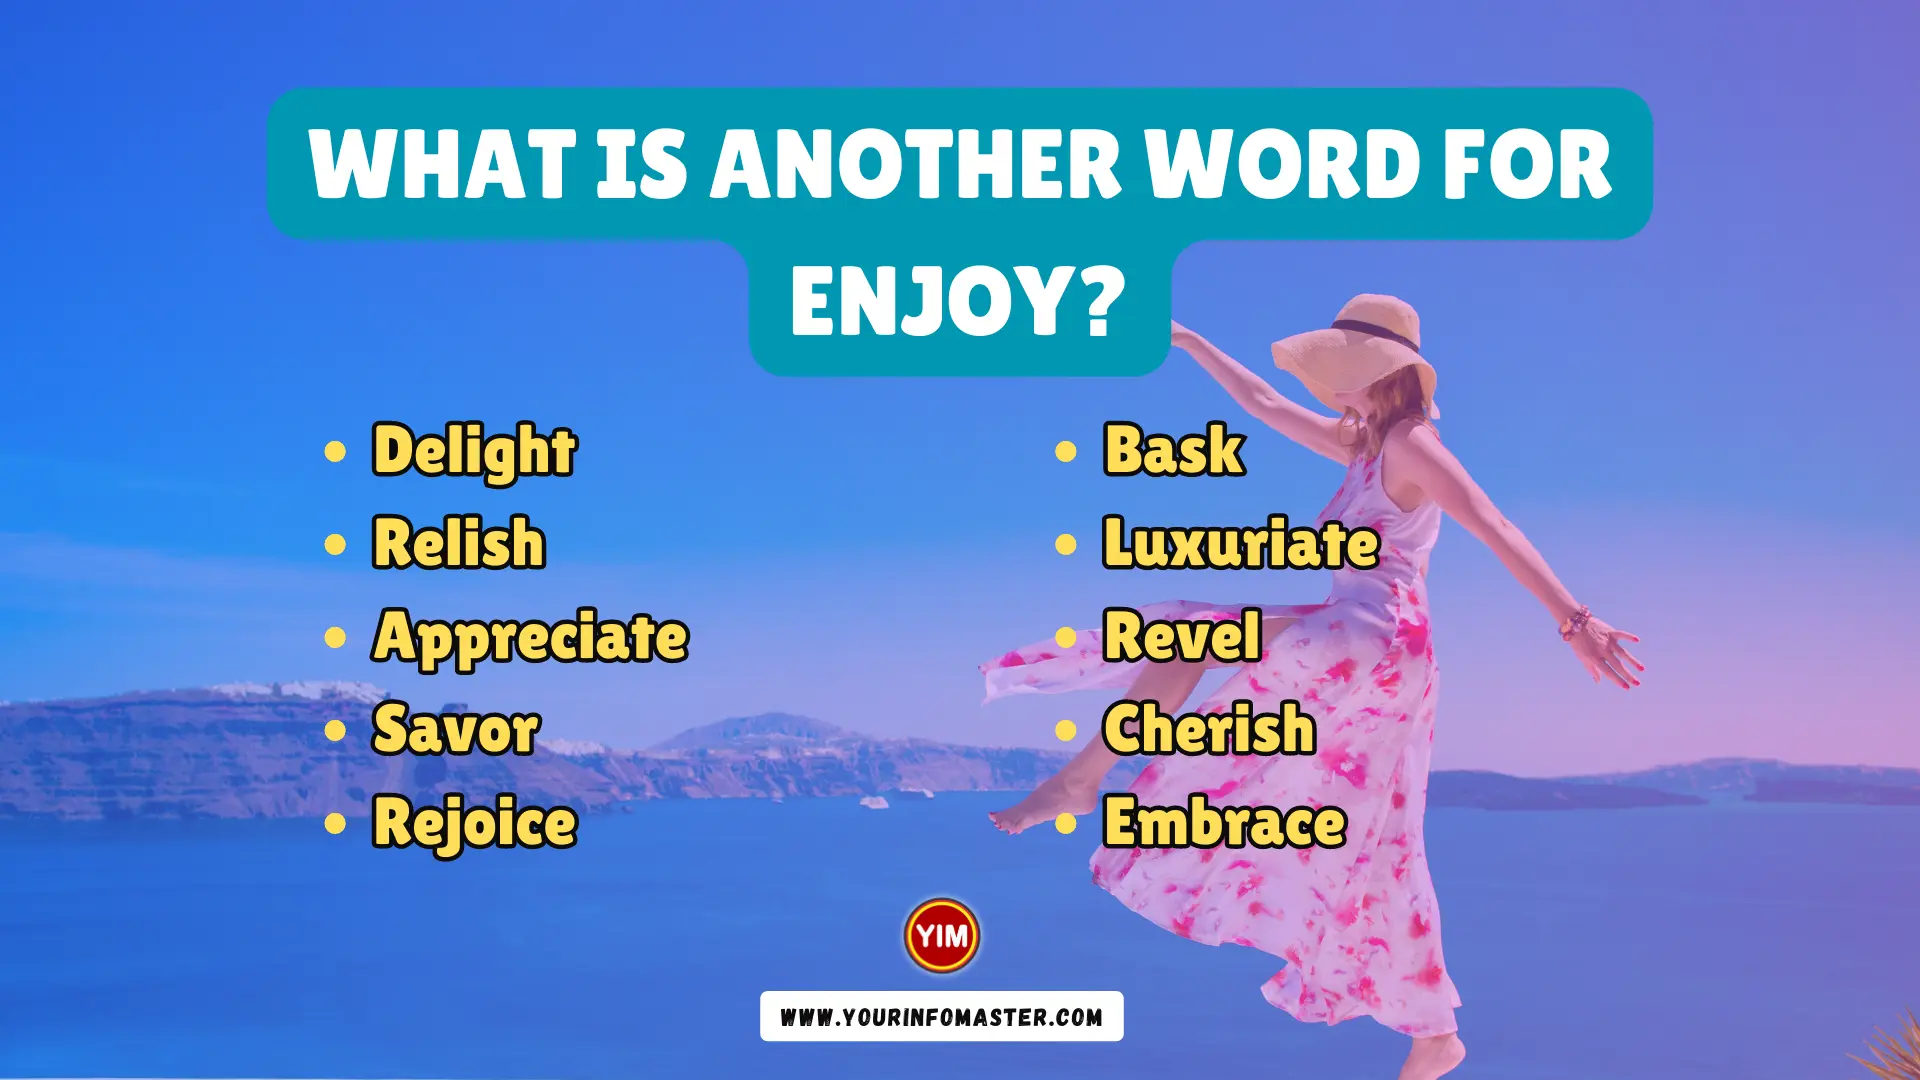 What is another word for Enjoy